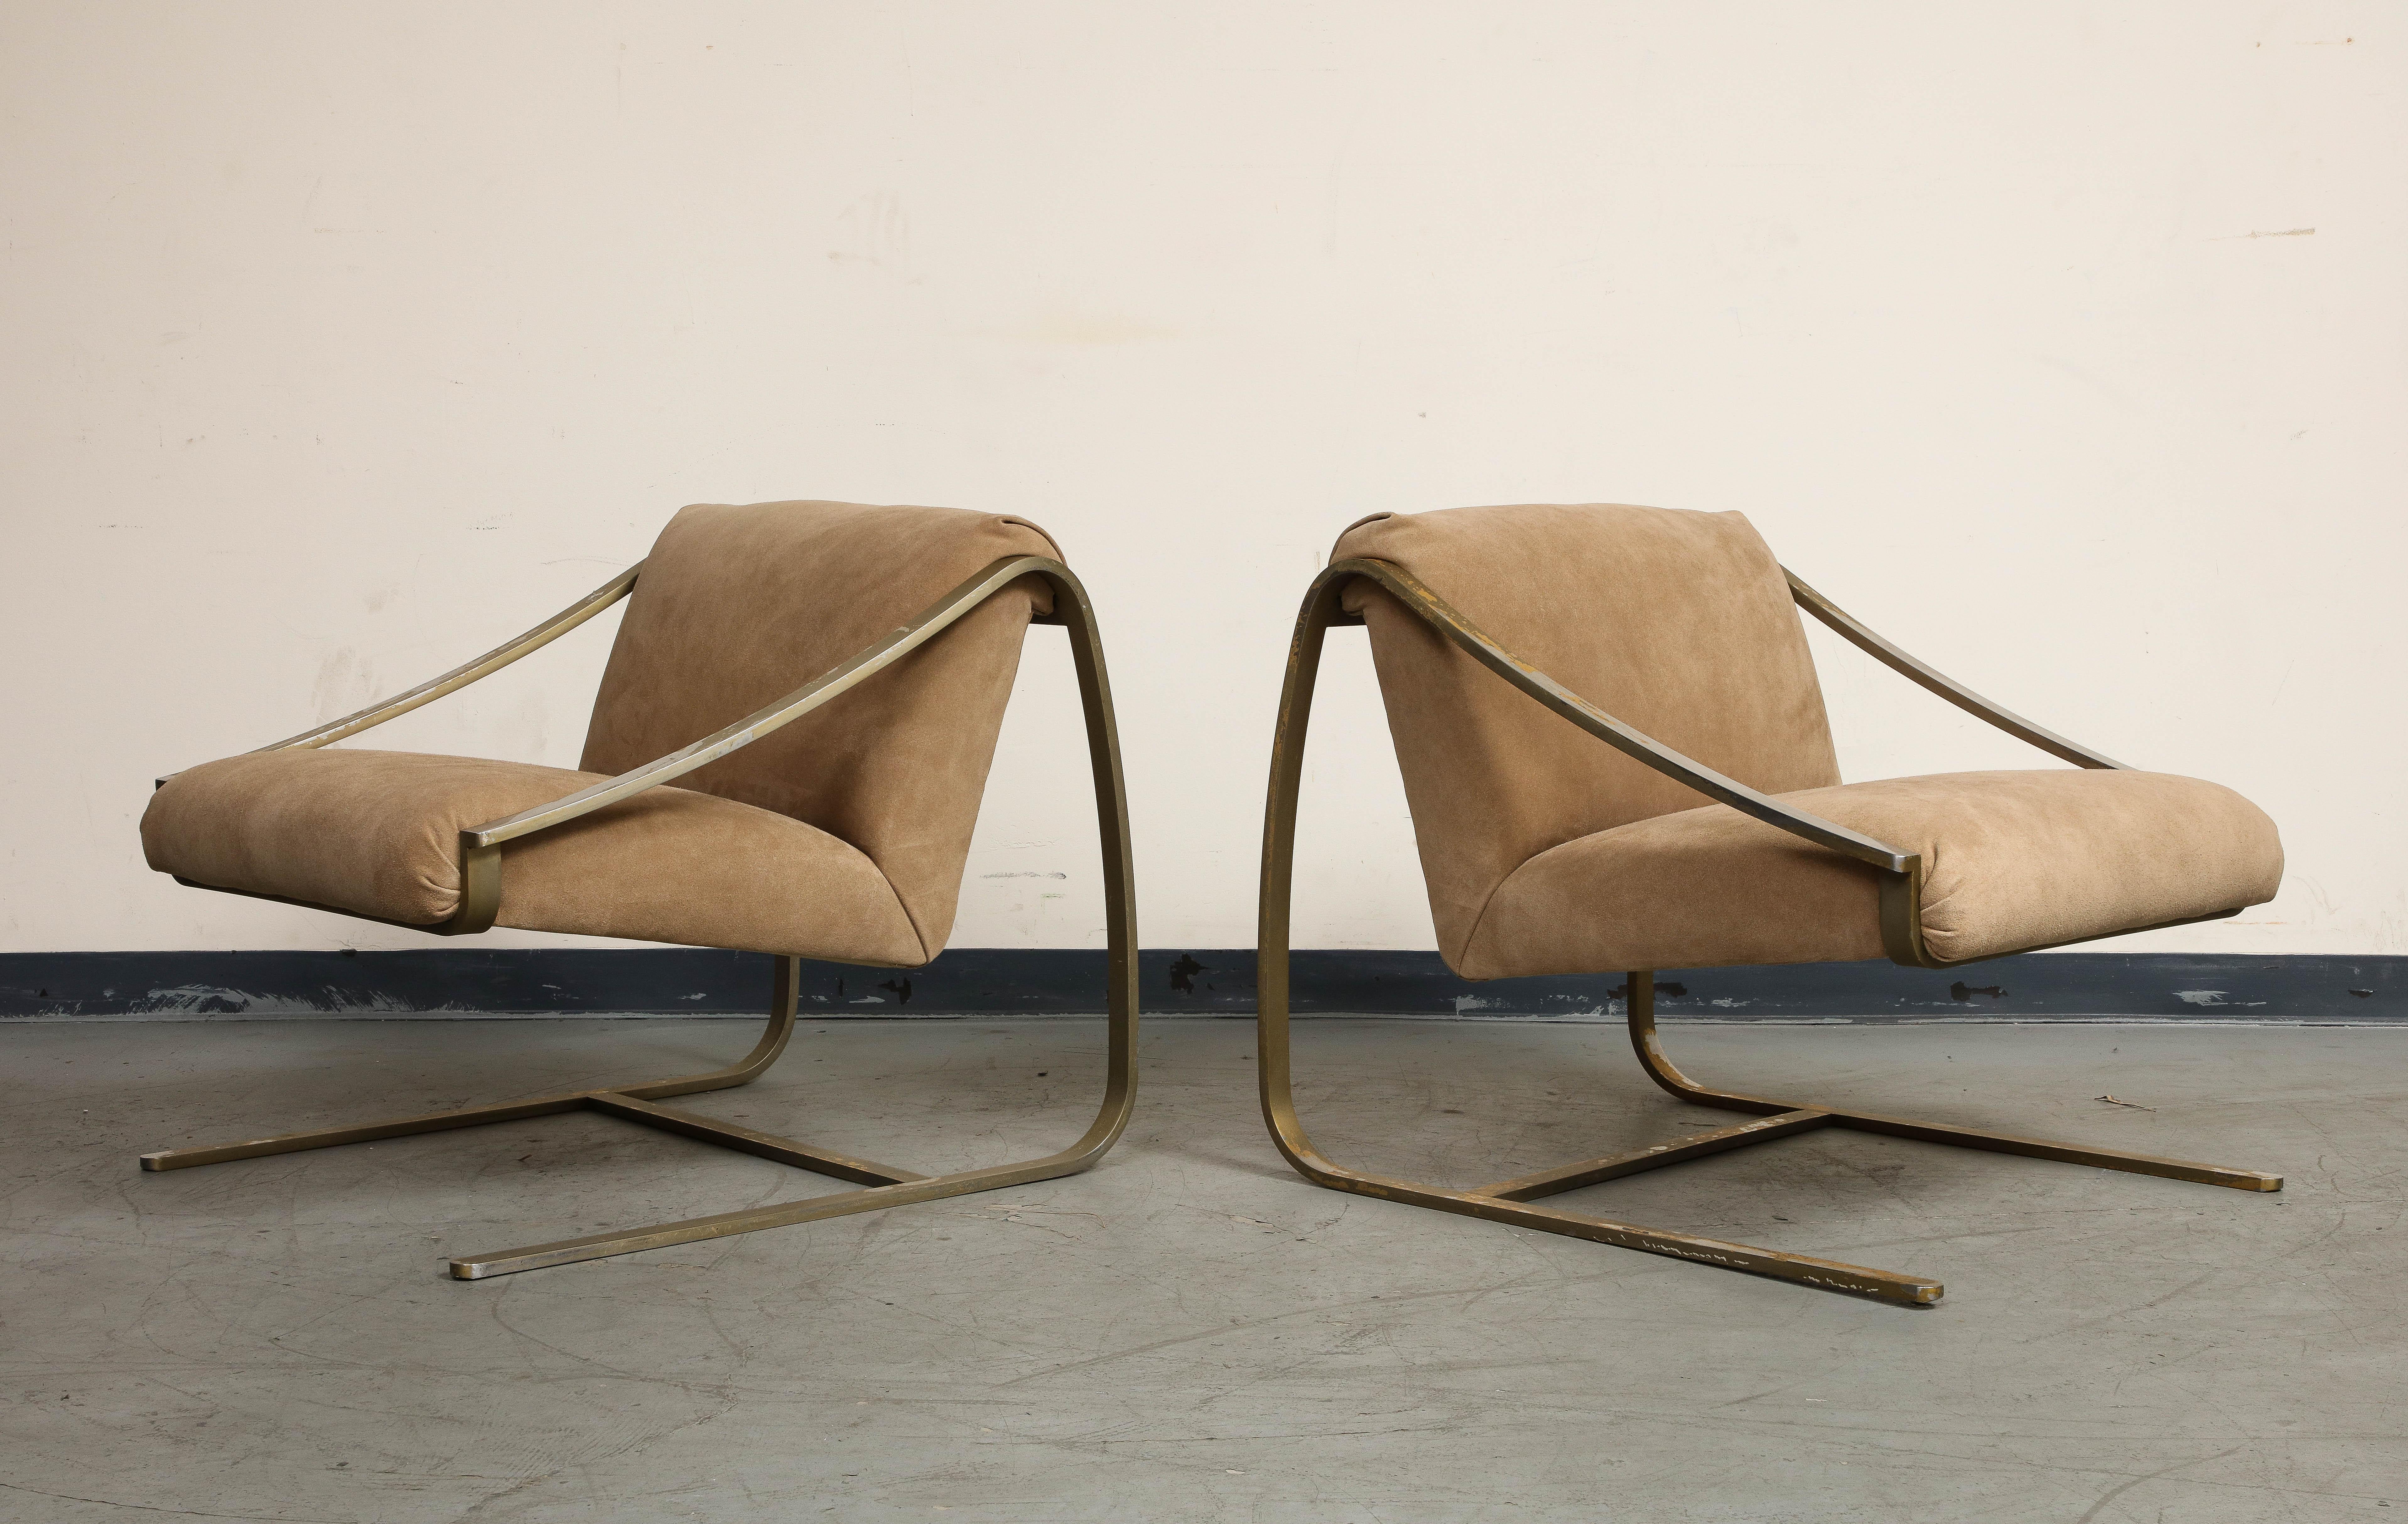 Pair of Bronze and Suede Modernist Lounge Chairs, circa 1965 For Sale 1